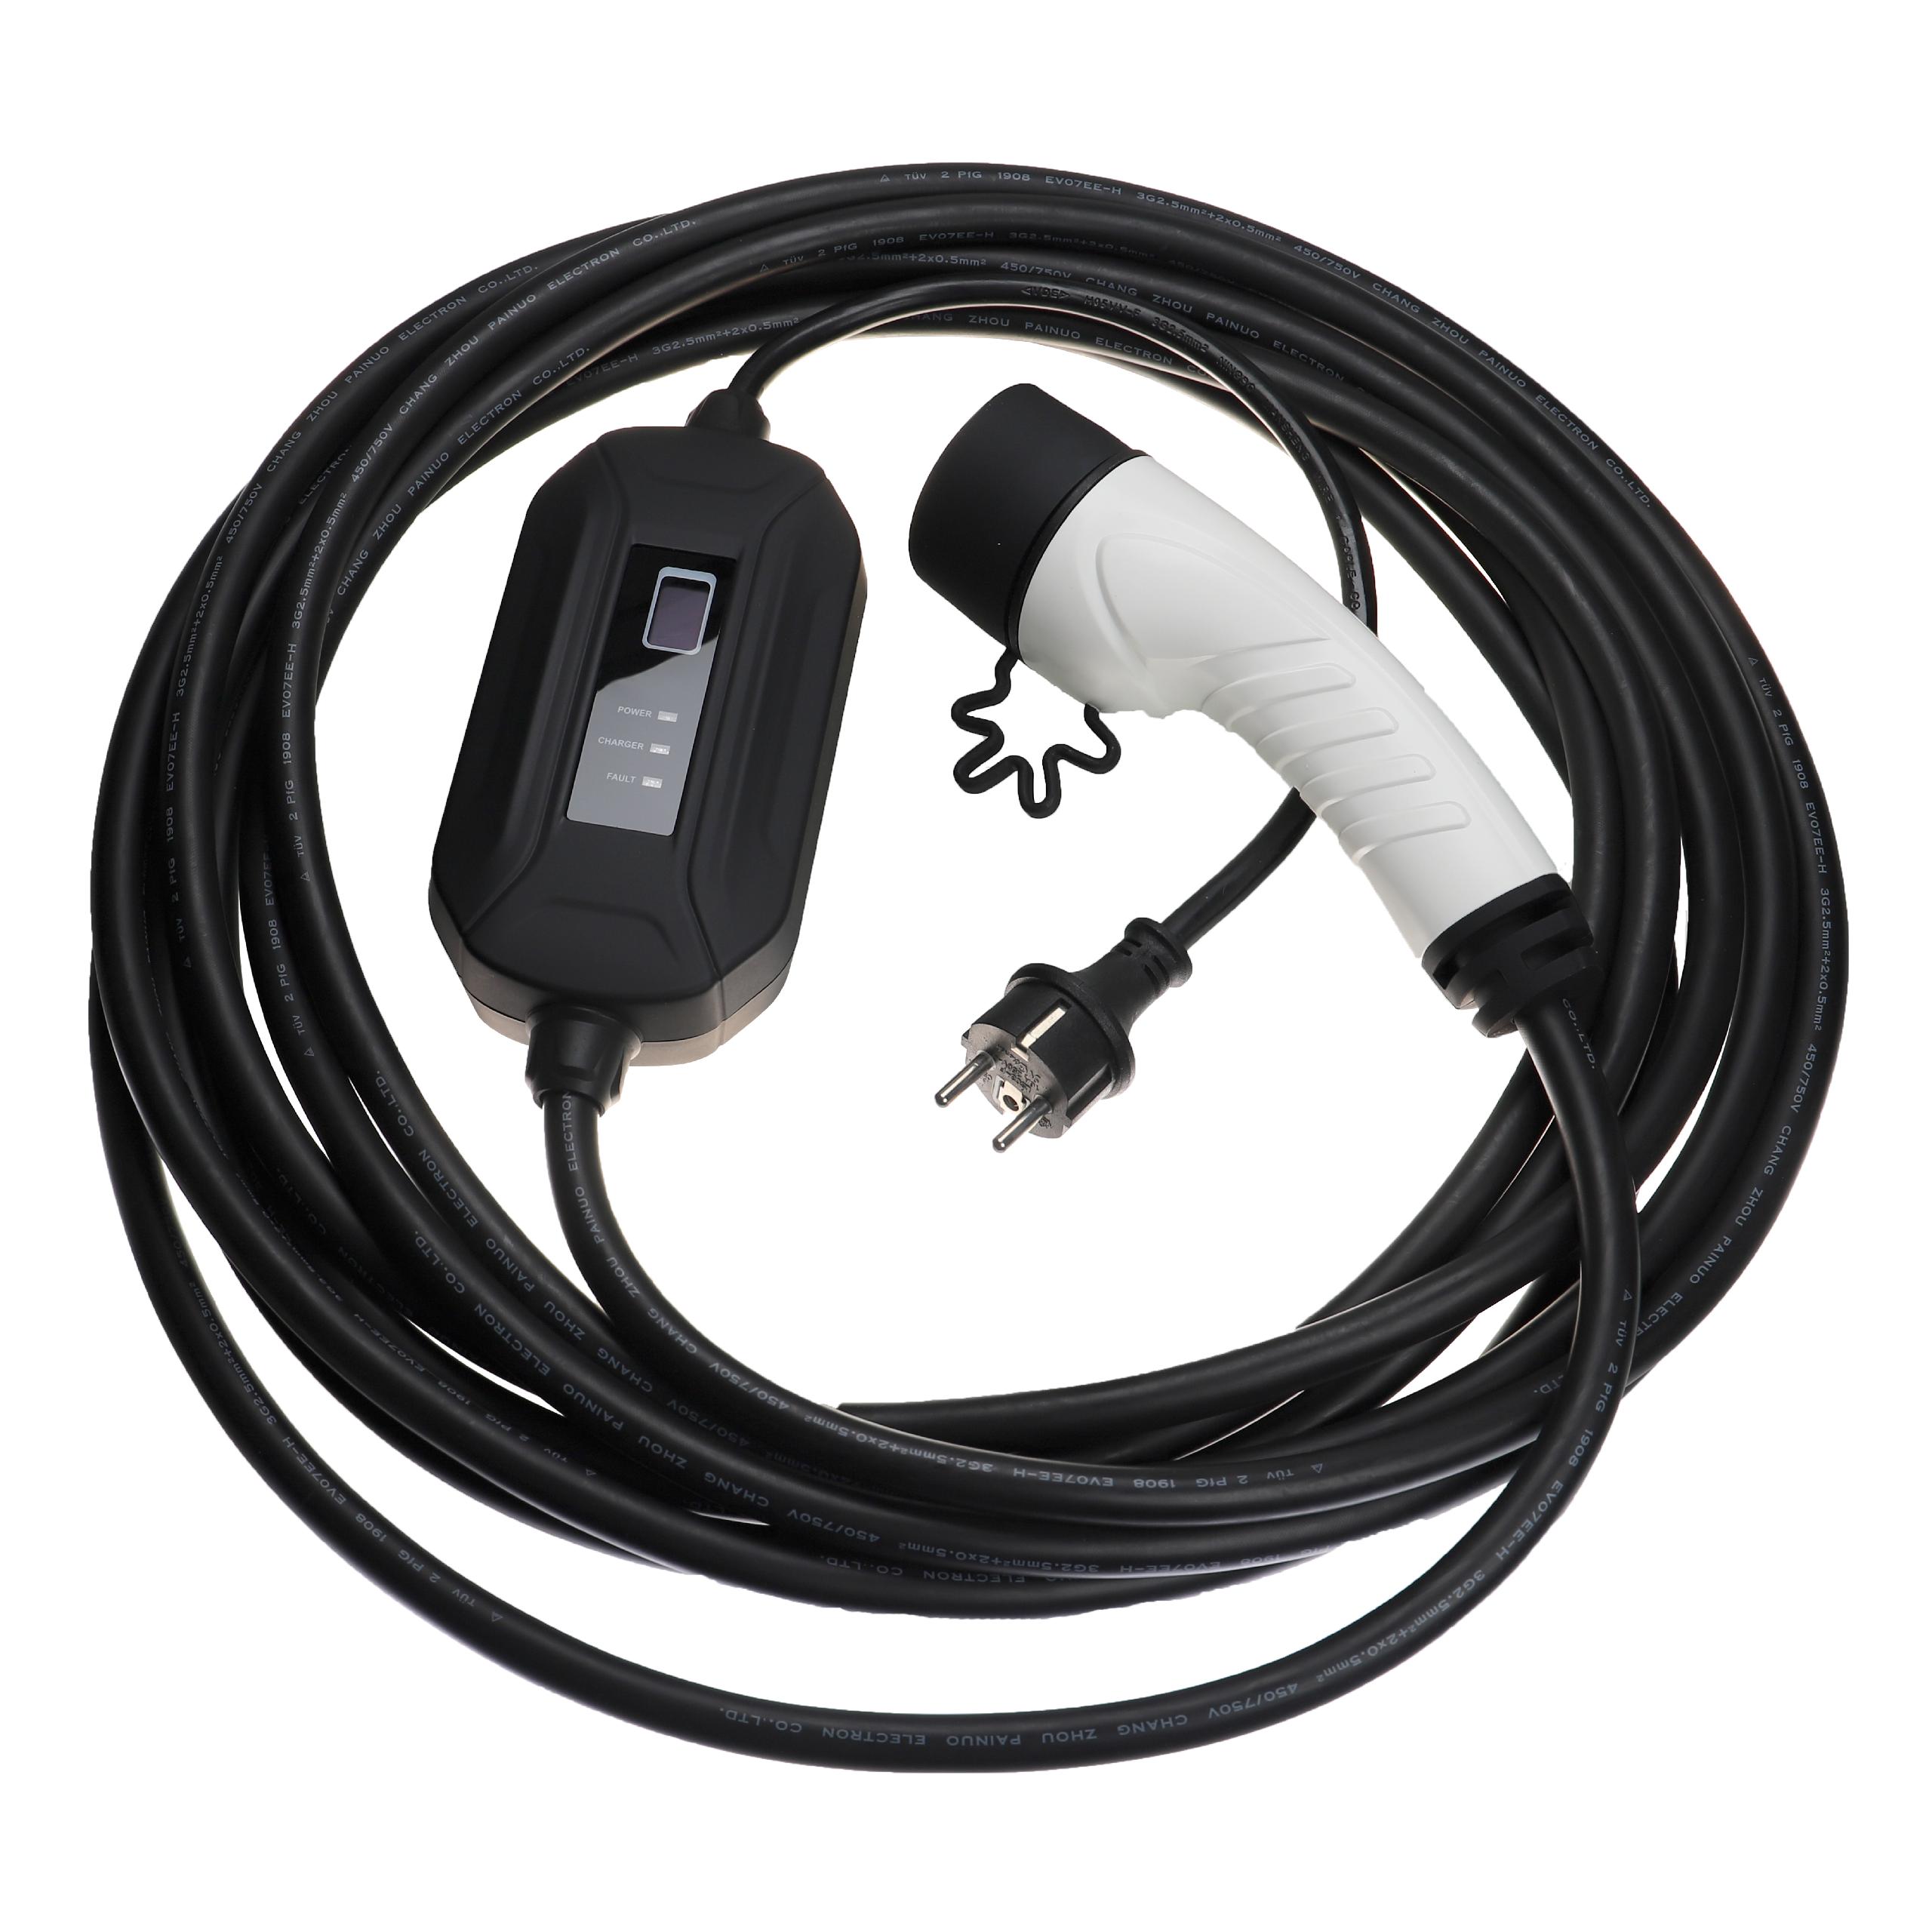 Charging Cable for Electric Car, Plug-In Hybrid - Type 2 to Euro Socket Cable, Single-Phase, 16 A, 3.5 kW, 10 